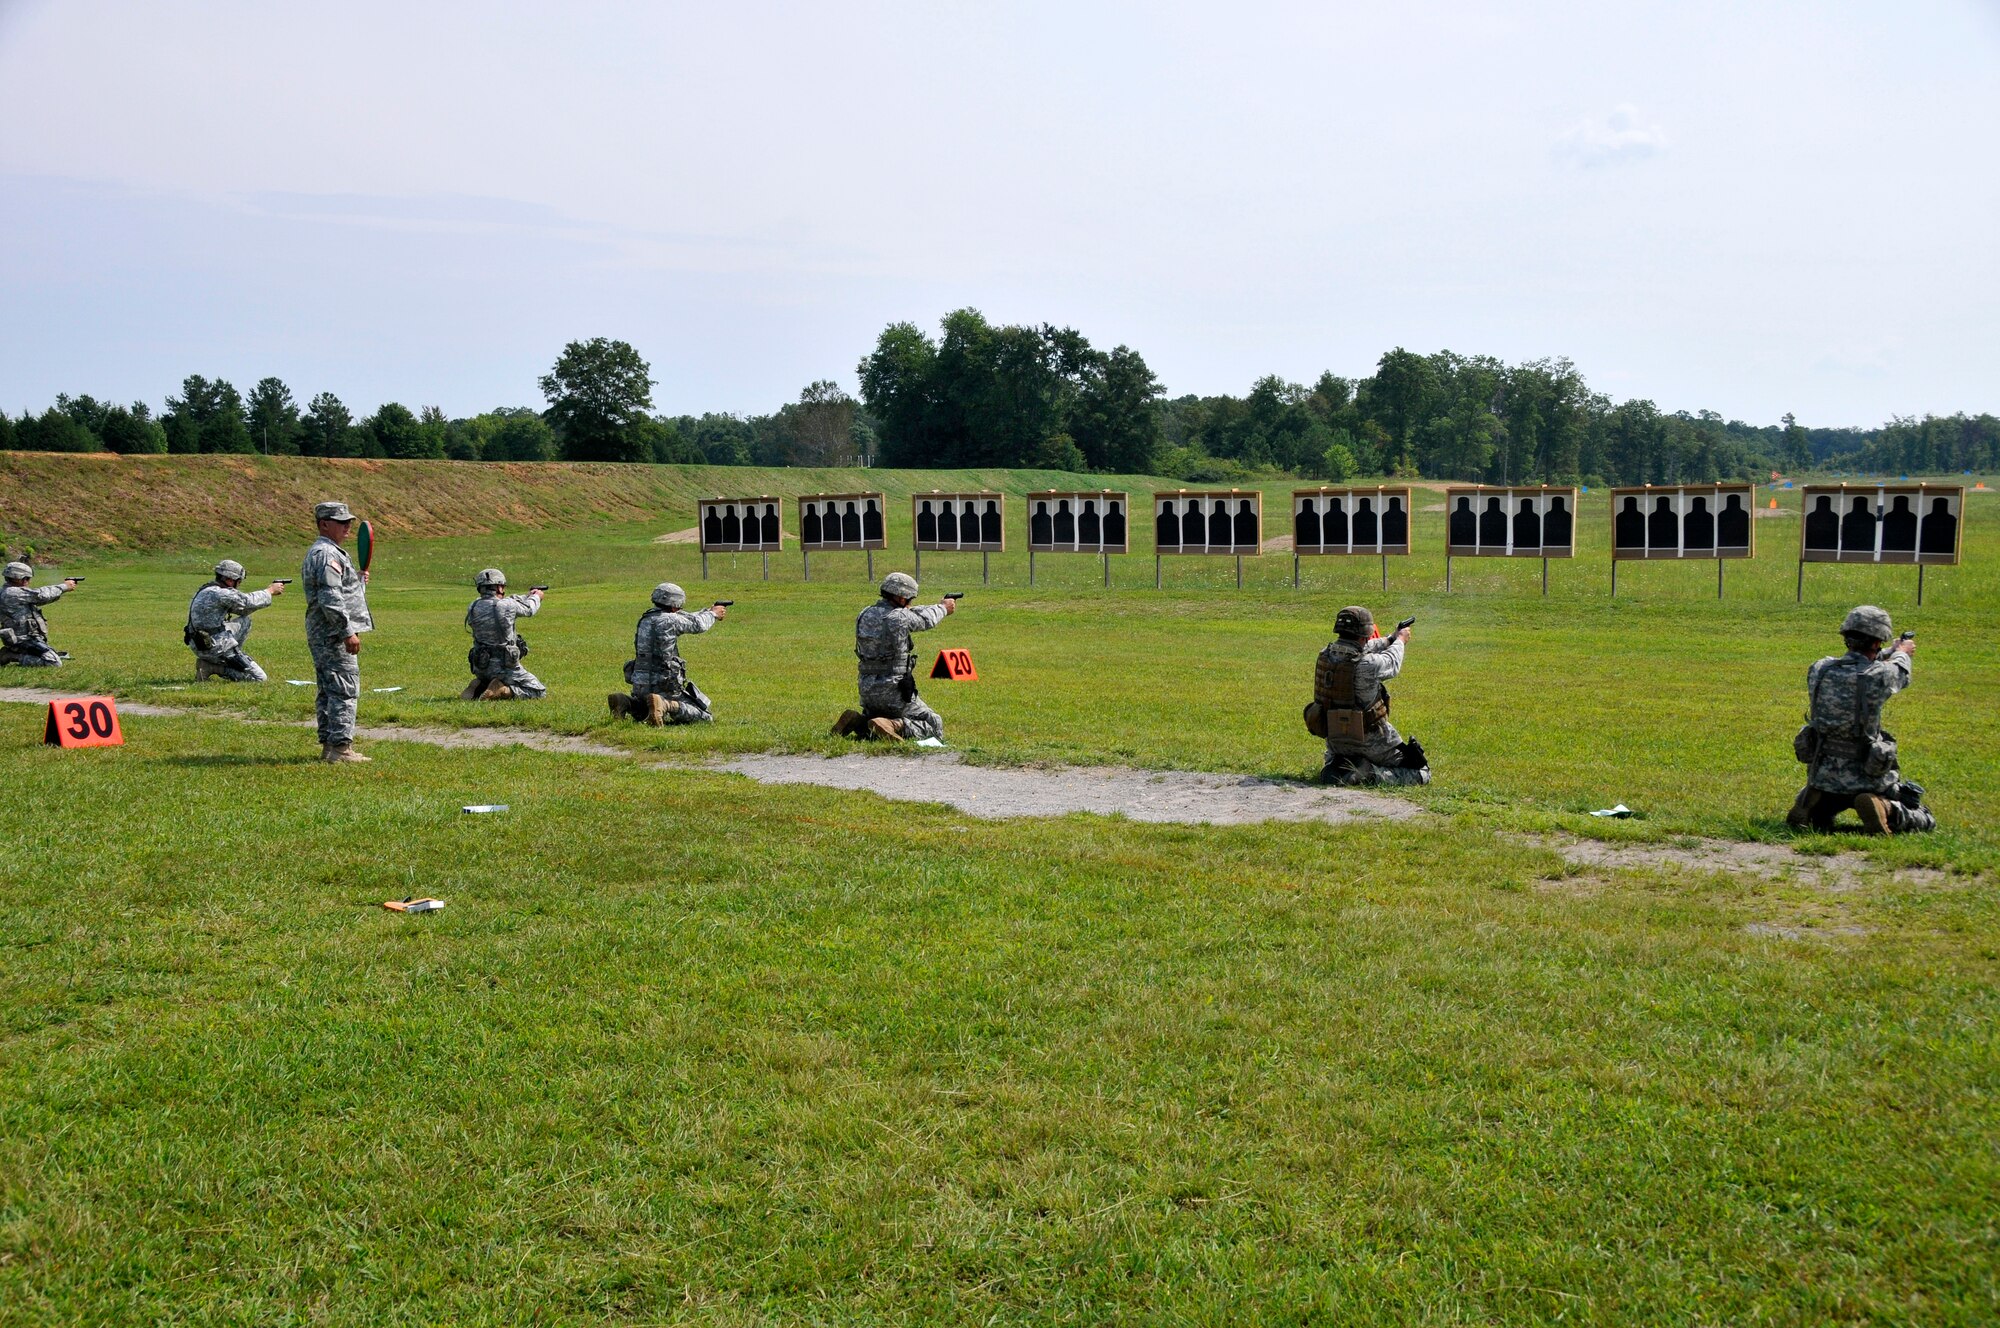 Members of the Tennessee Army and Air National Guard practice their shooting skills in the kneeling position with a Beretta M9 service pistol during a training session at the 2014 Tennessee Adjutant General Marksmanship Pistol Match in Tullahoma, TN on Aug 16. The Tennesee TAG Match is held anually to promote marksmanship skills in the Army and Air National Guard.  (U.S. Air National Guard photo by Master Sgt. Kendra M. Owenby, 134 ARW Public Affairs)